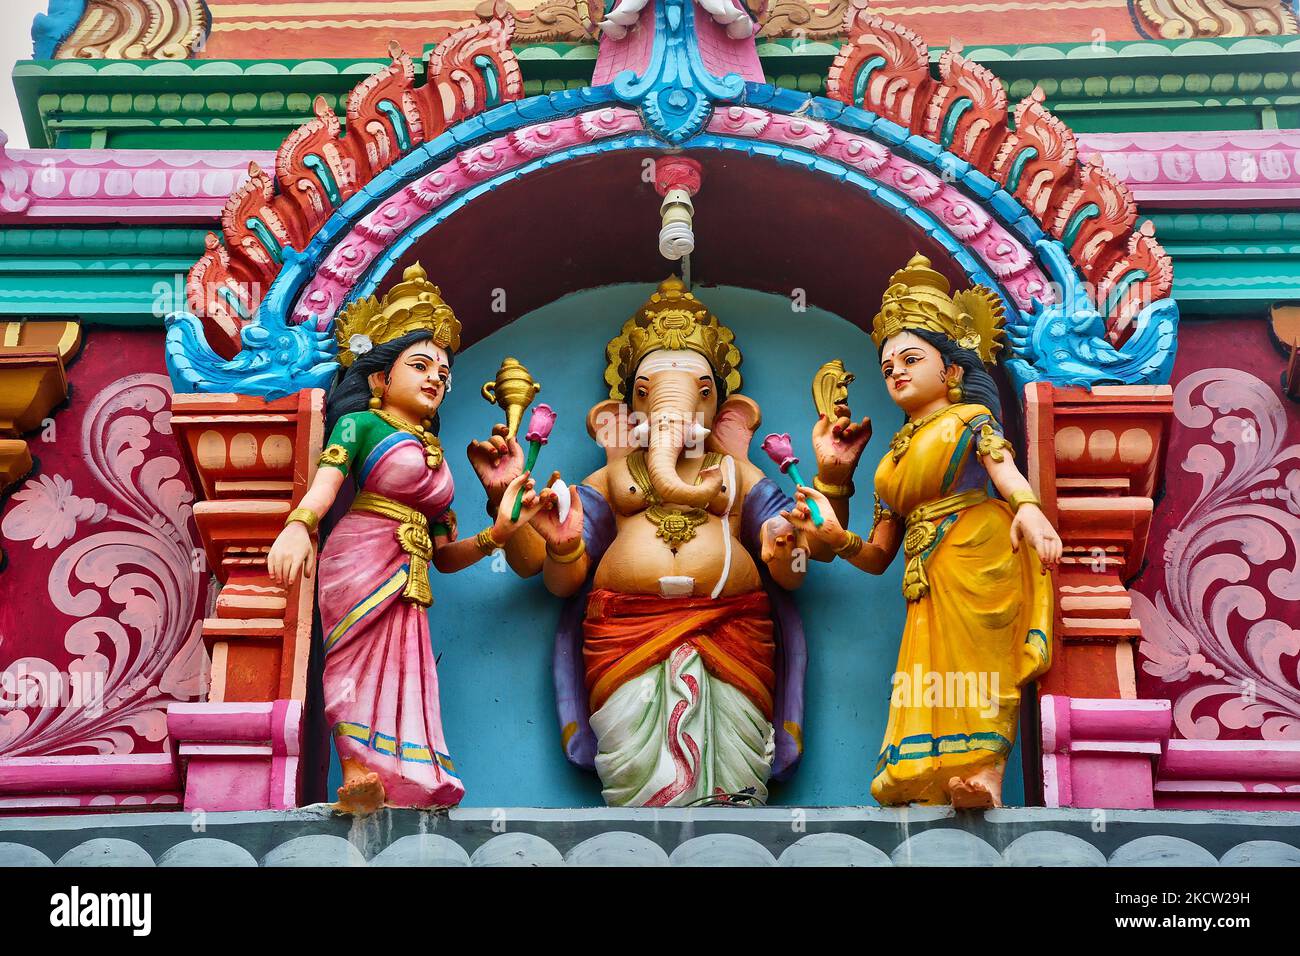 Figure of Lord Vinayagar (Lord Ganesh) adorns a Hindu temple in Mullaitivu, Sri Lanka. This temple was known to have been frequented by Velupillai Prabhakaran, the deceased leader of the LTTE (Liberation Tigers of Tamil Eelam) fighters. The temple was damaged during bombing by the Sri Lankan army during the civil war and is now being rebuilt. (Photo by Creative Touch Imaging Ltd./NurPhoto) Stock Photo